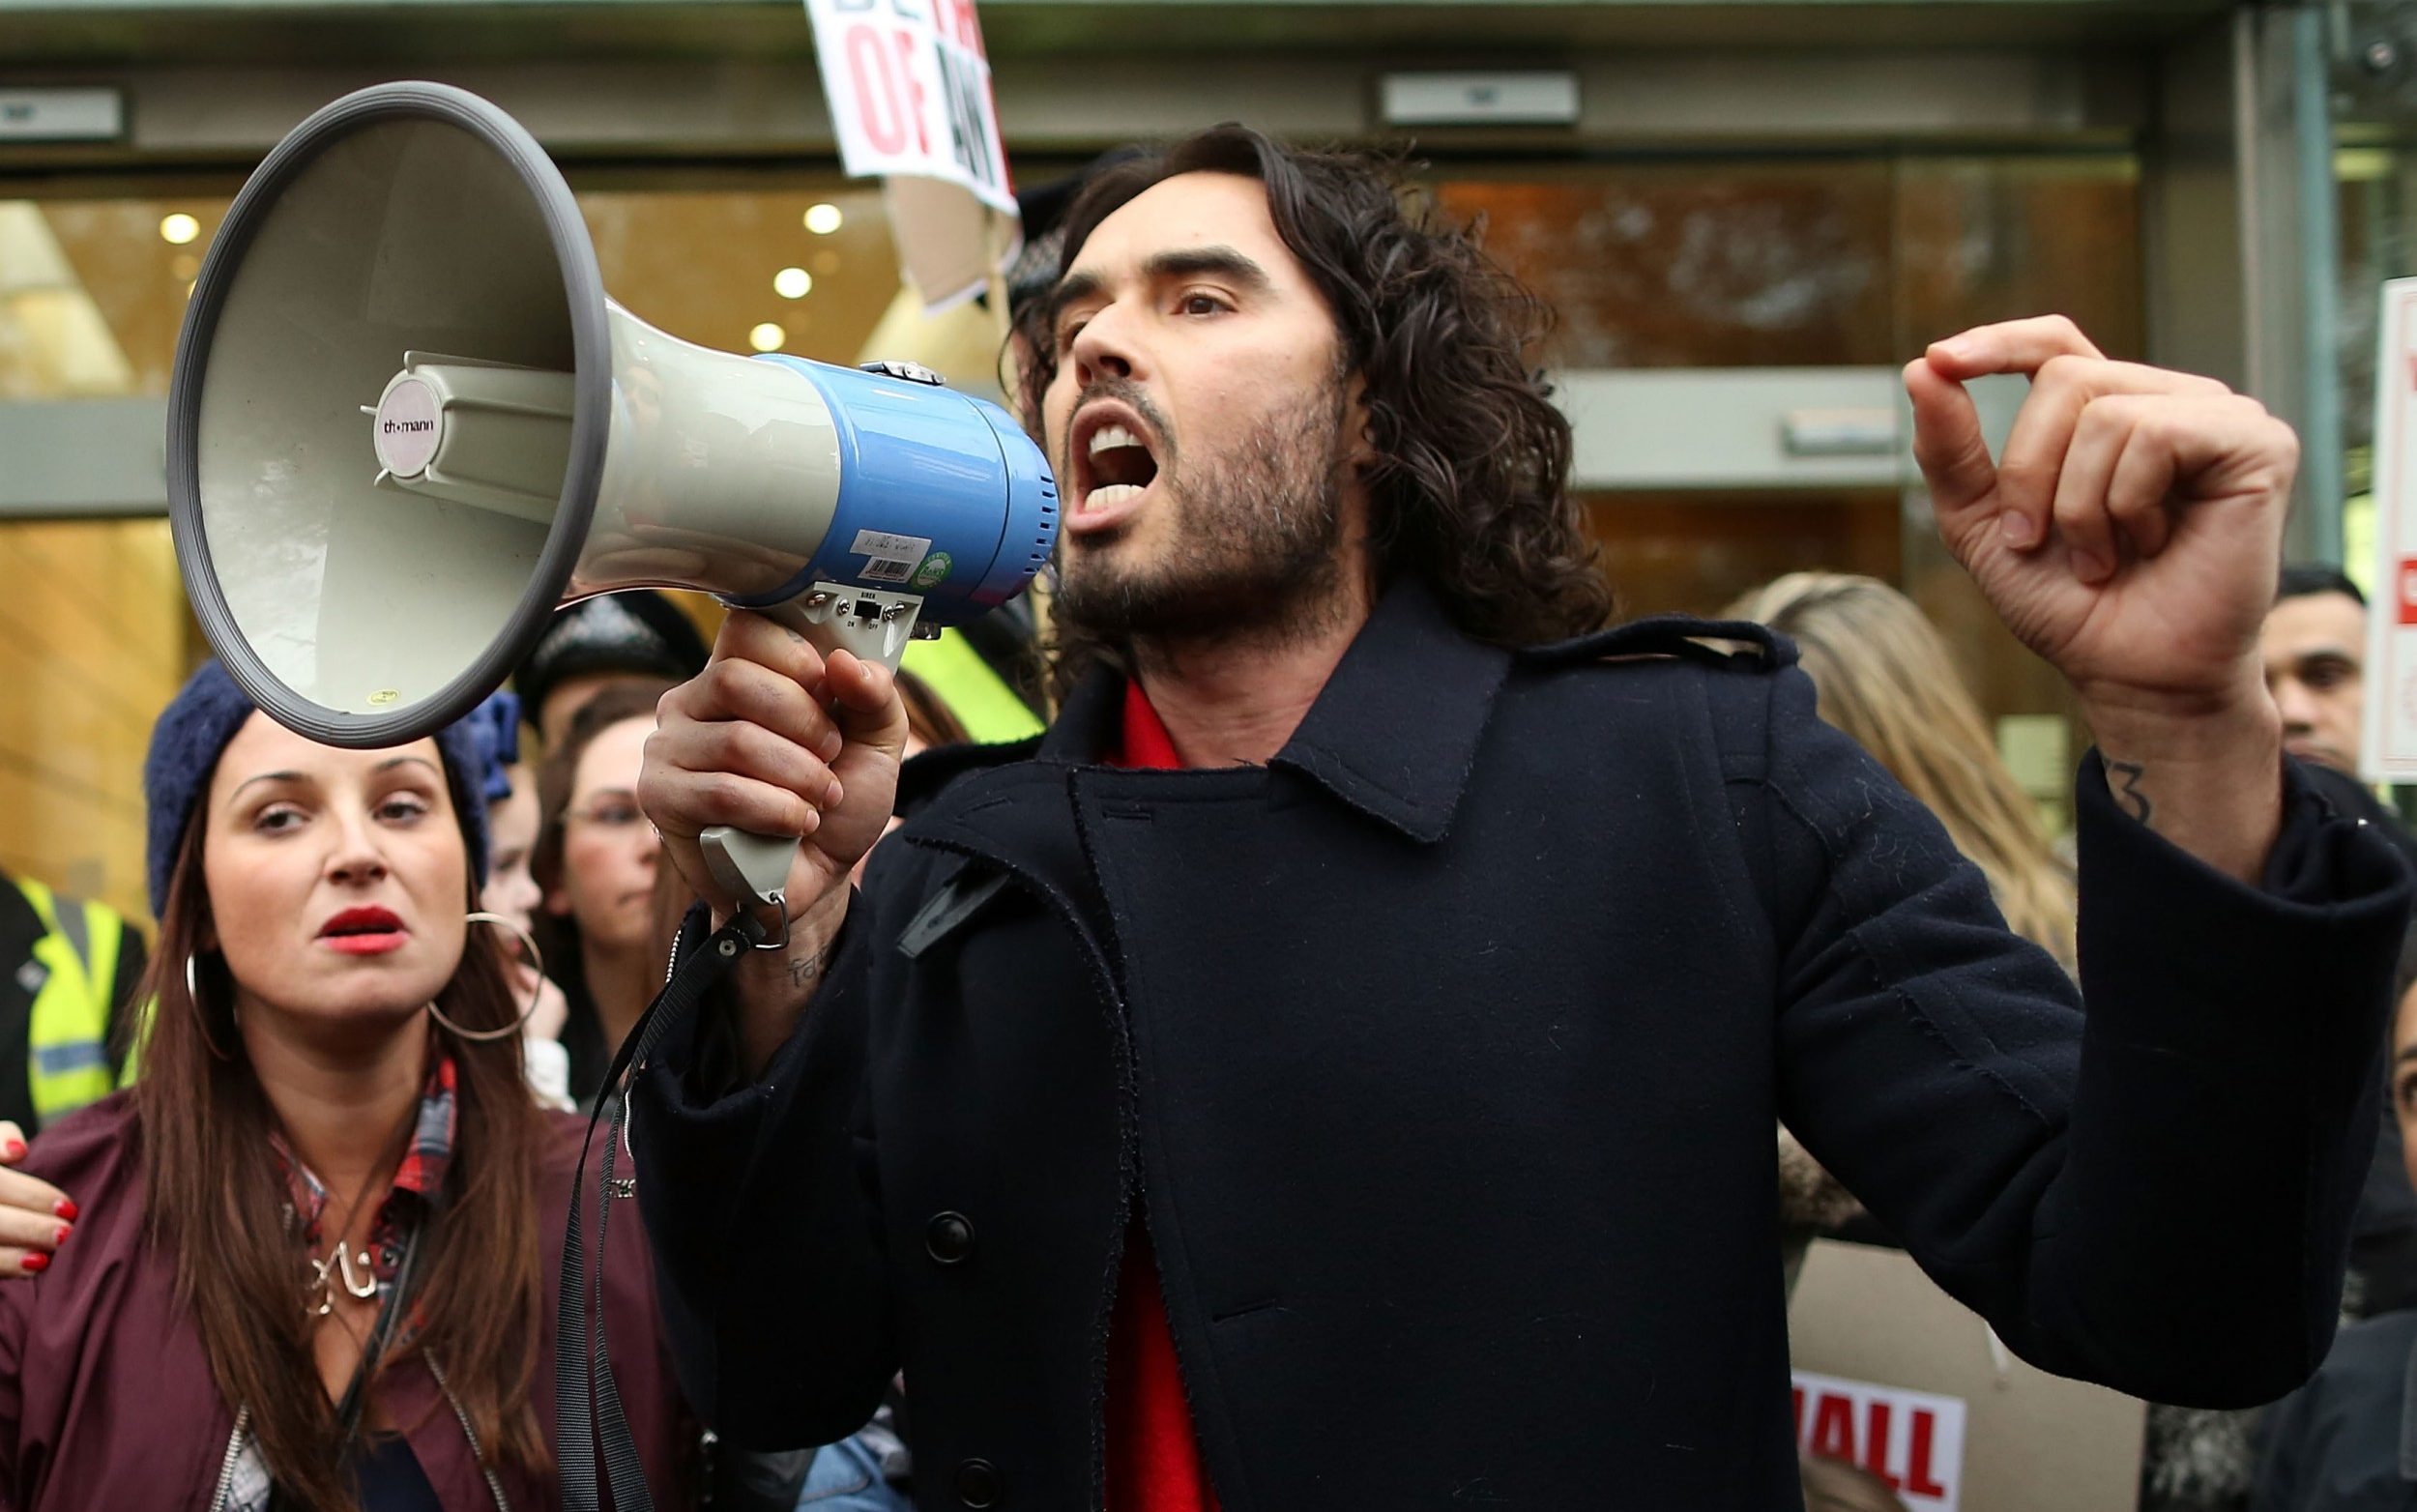 russell brand wasnt an anomaly